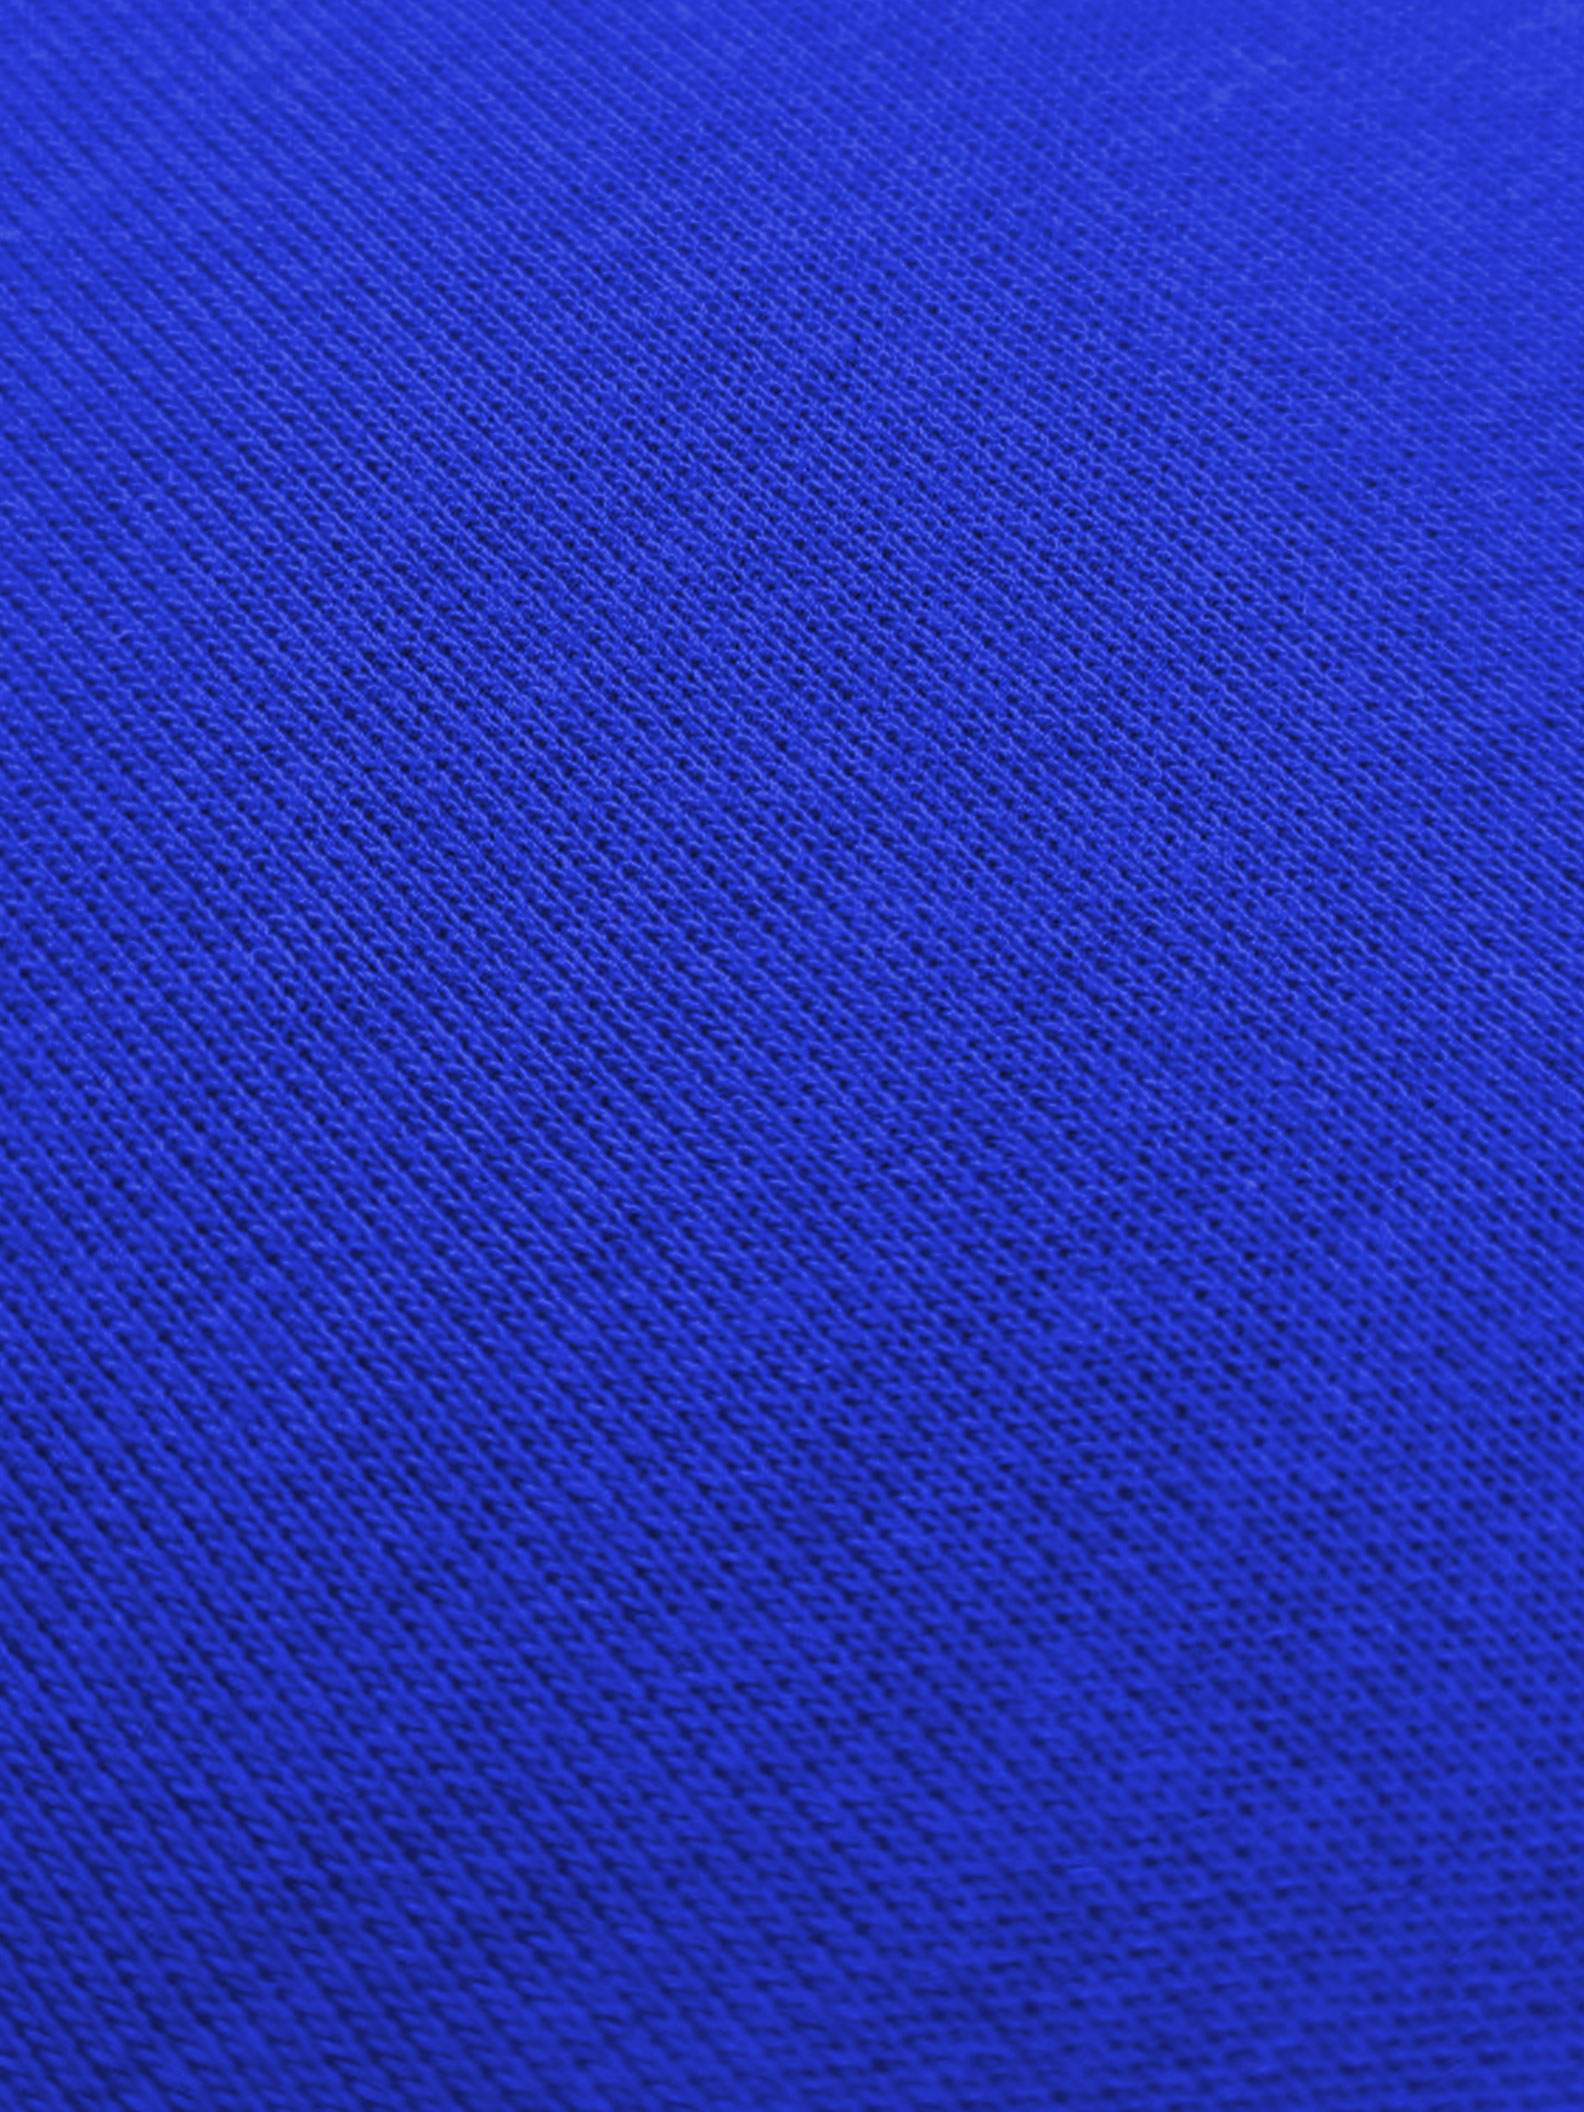 Knitted Cotton Fabric | Custom Made, Custom GSM, SuperSoft